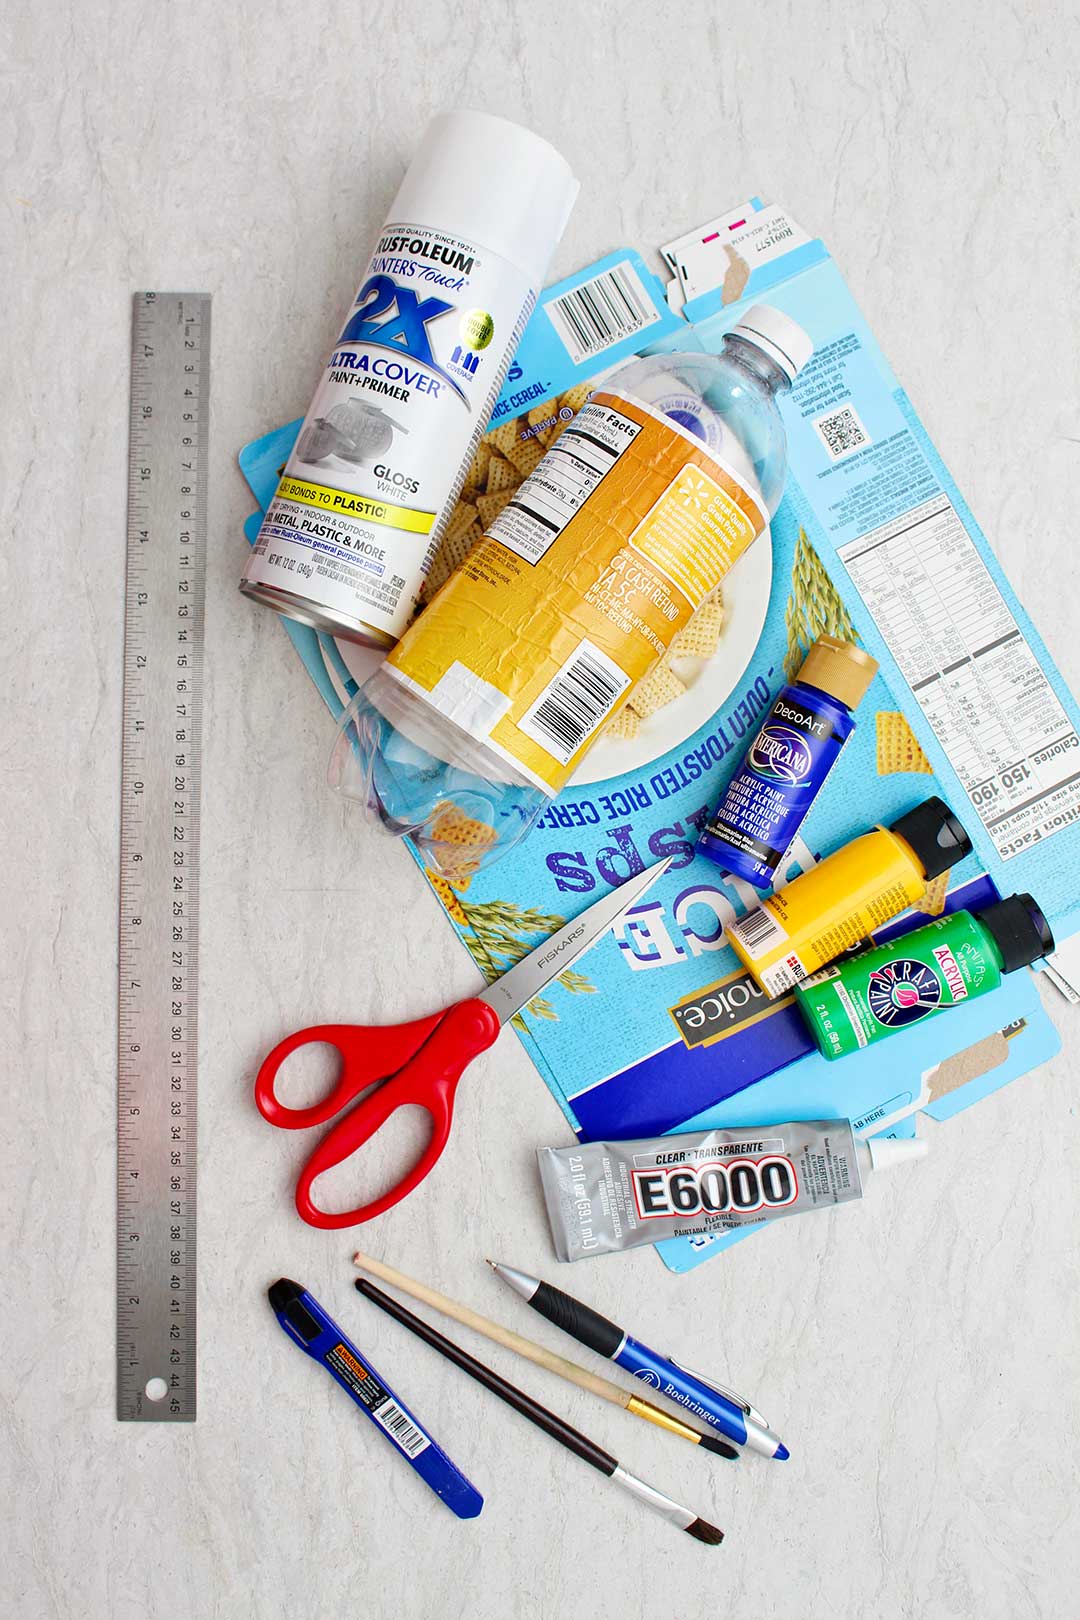 Supplies for a plastic bottle airplane. White spray paint, empty plastic soda bottle, flattened cardboard cereal box, paints, scissors, ruler, and glue.